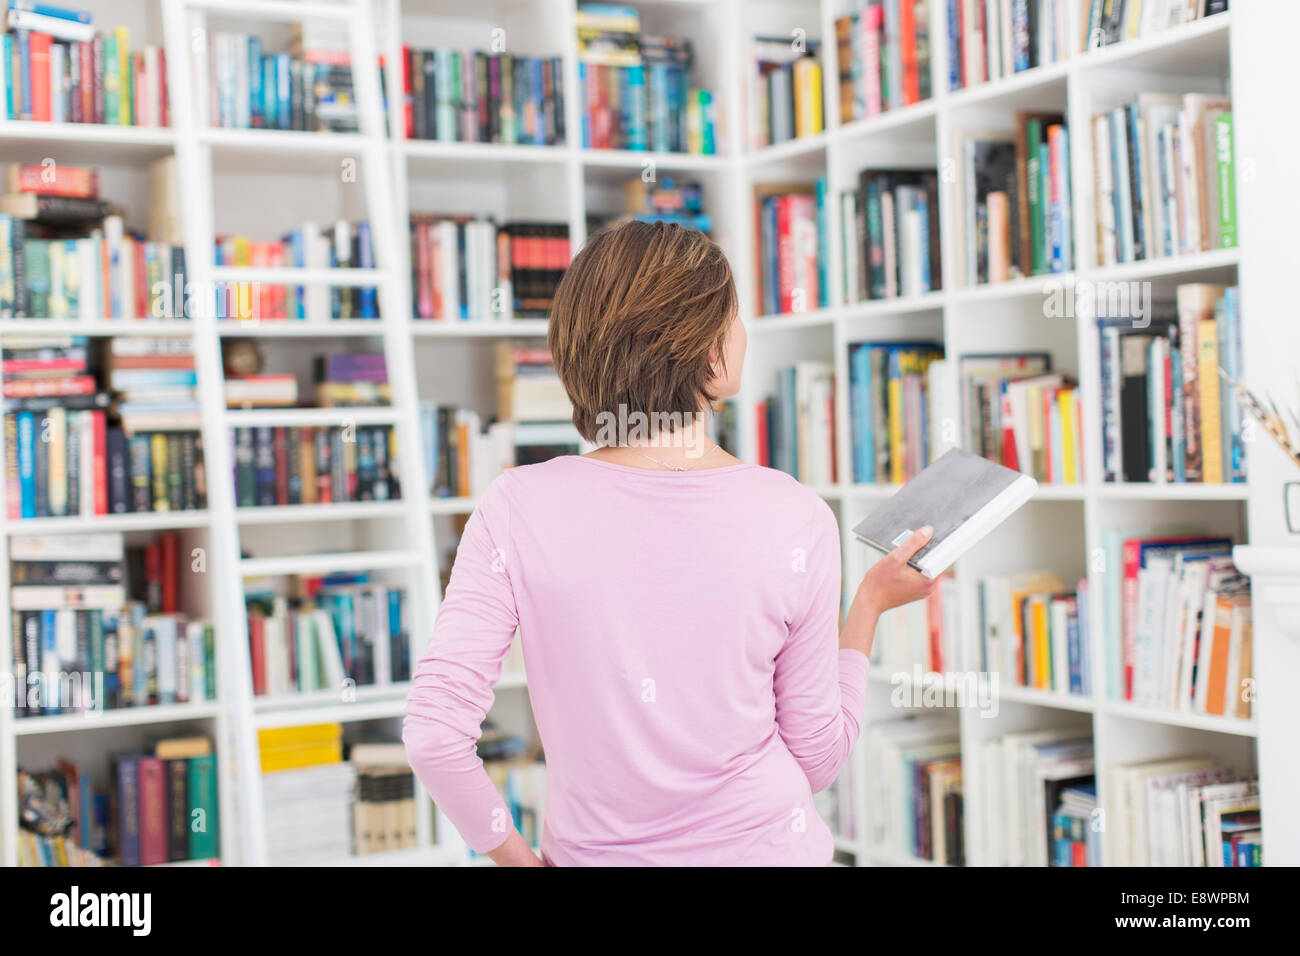 Woman selecting book from library Stock Photo